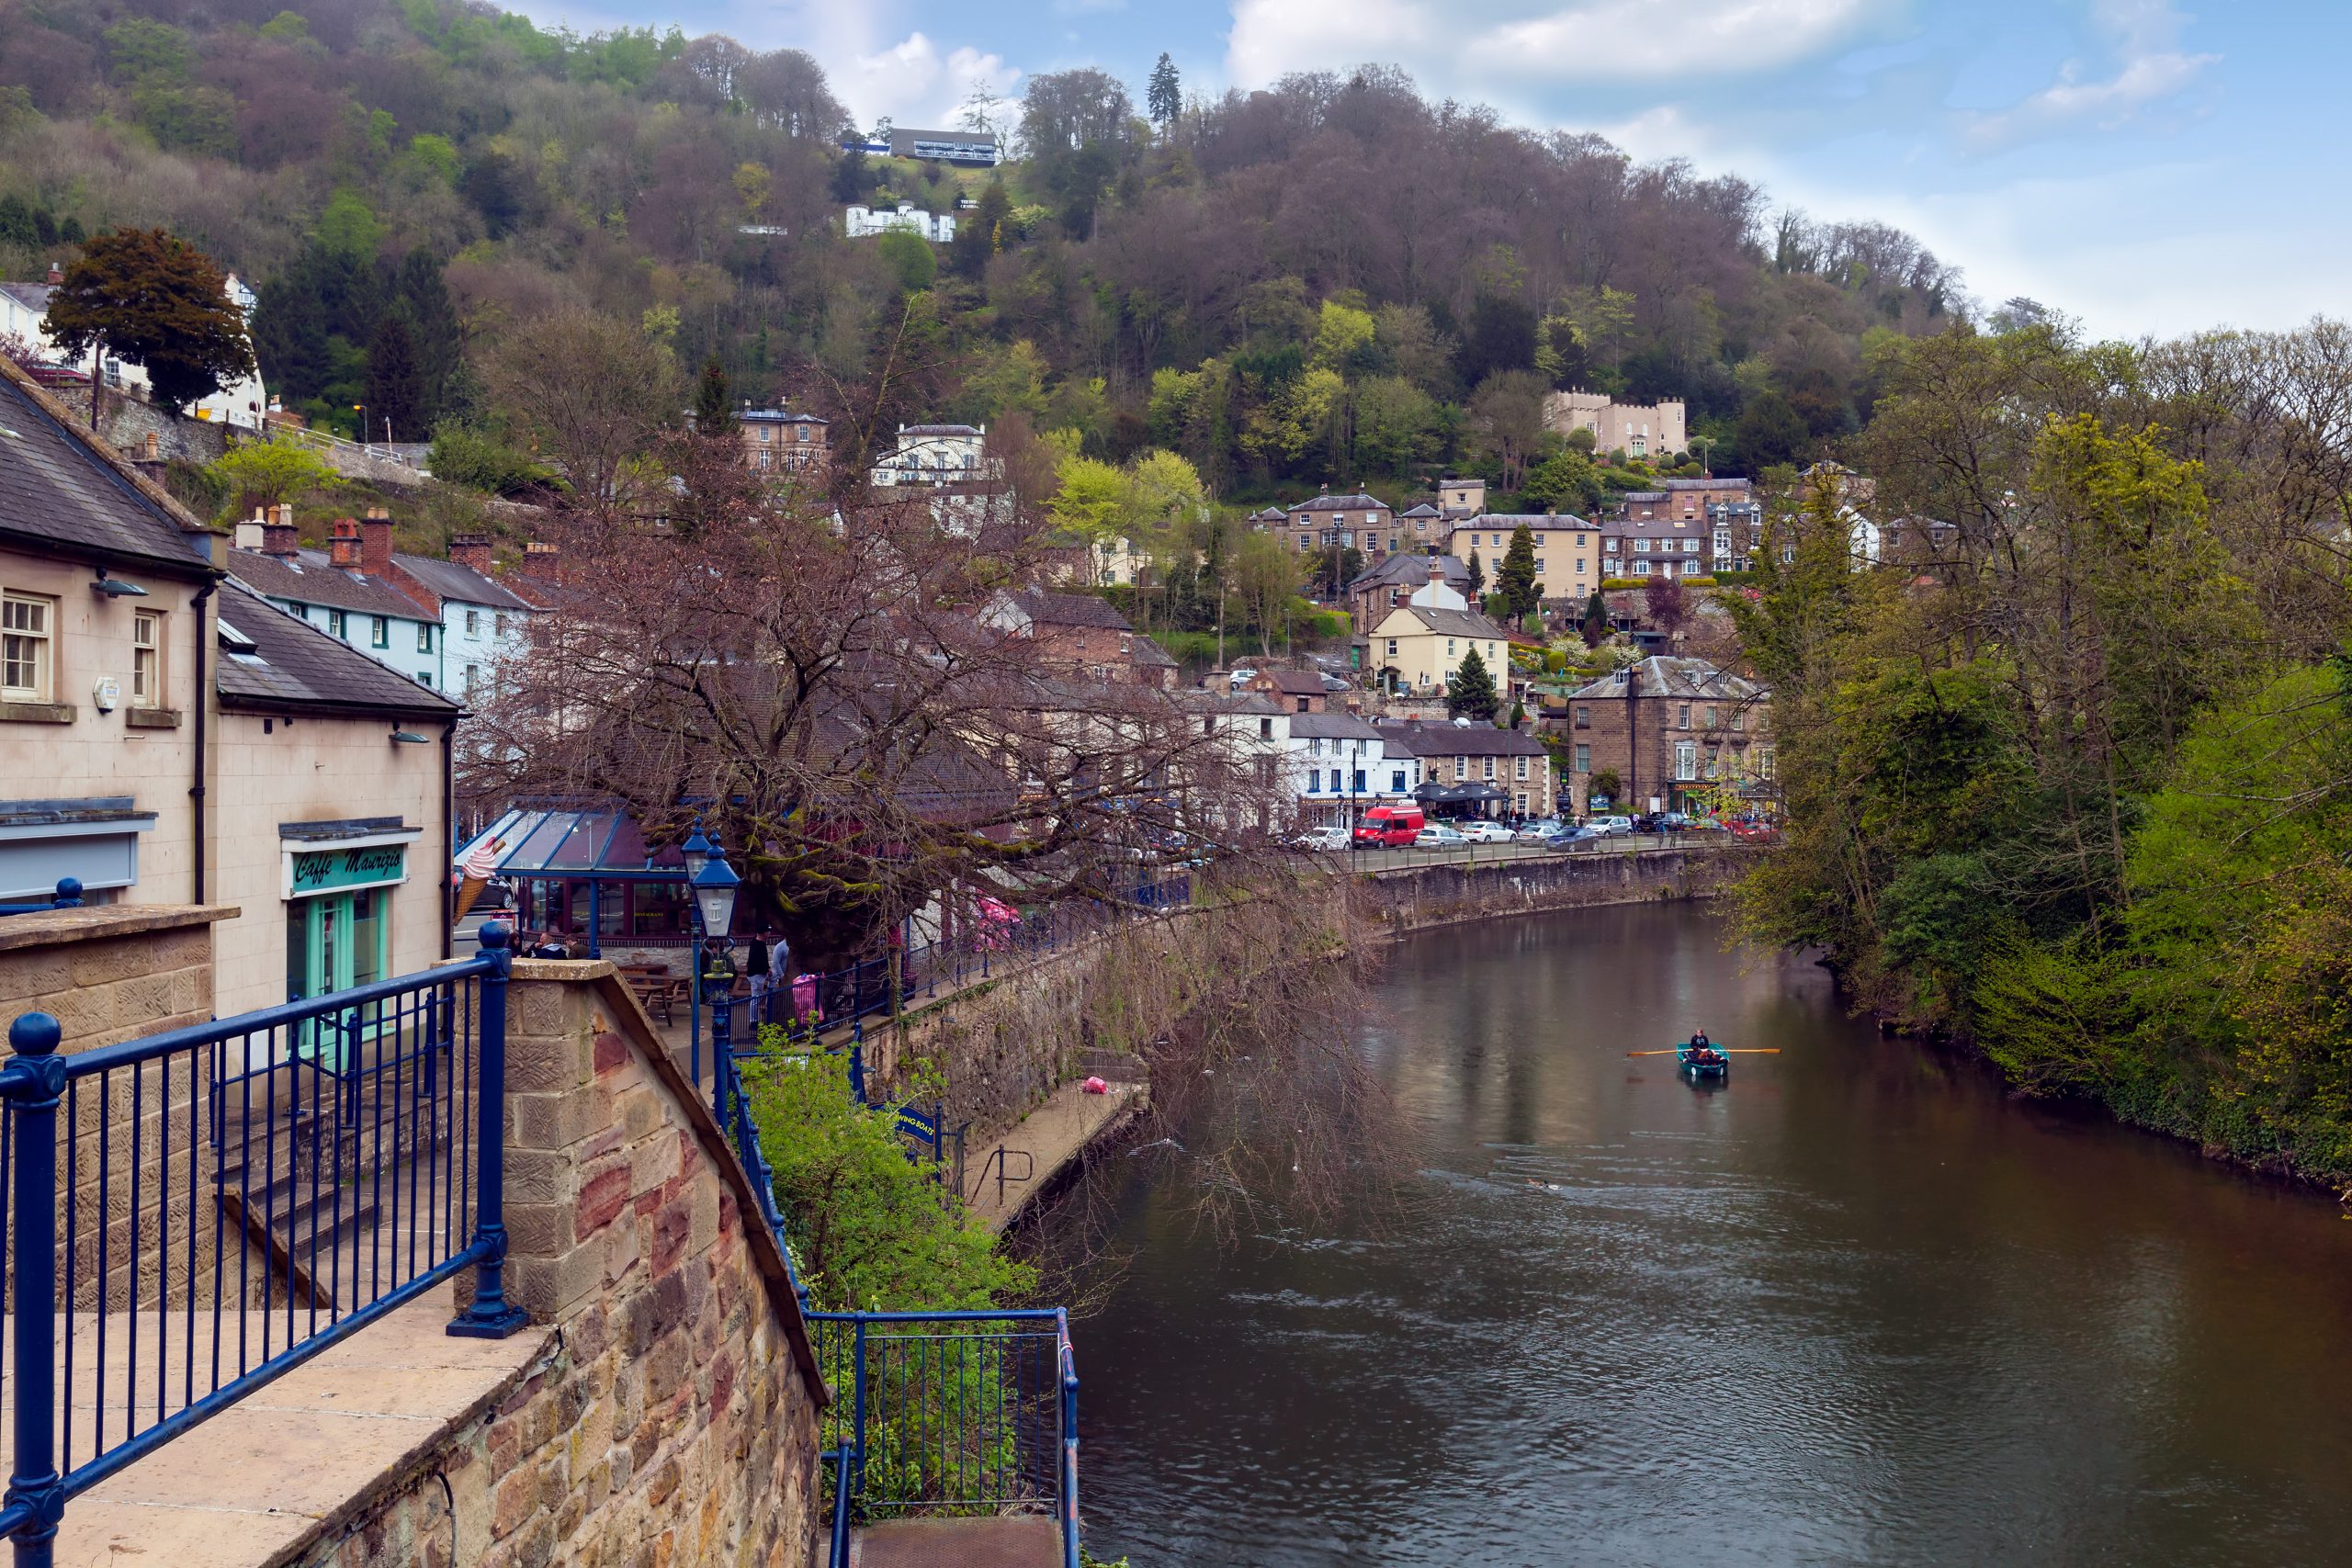 Visit Matlock Bath with Allied Taxis